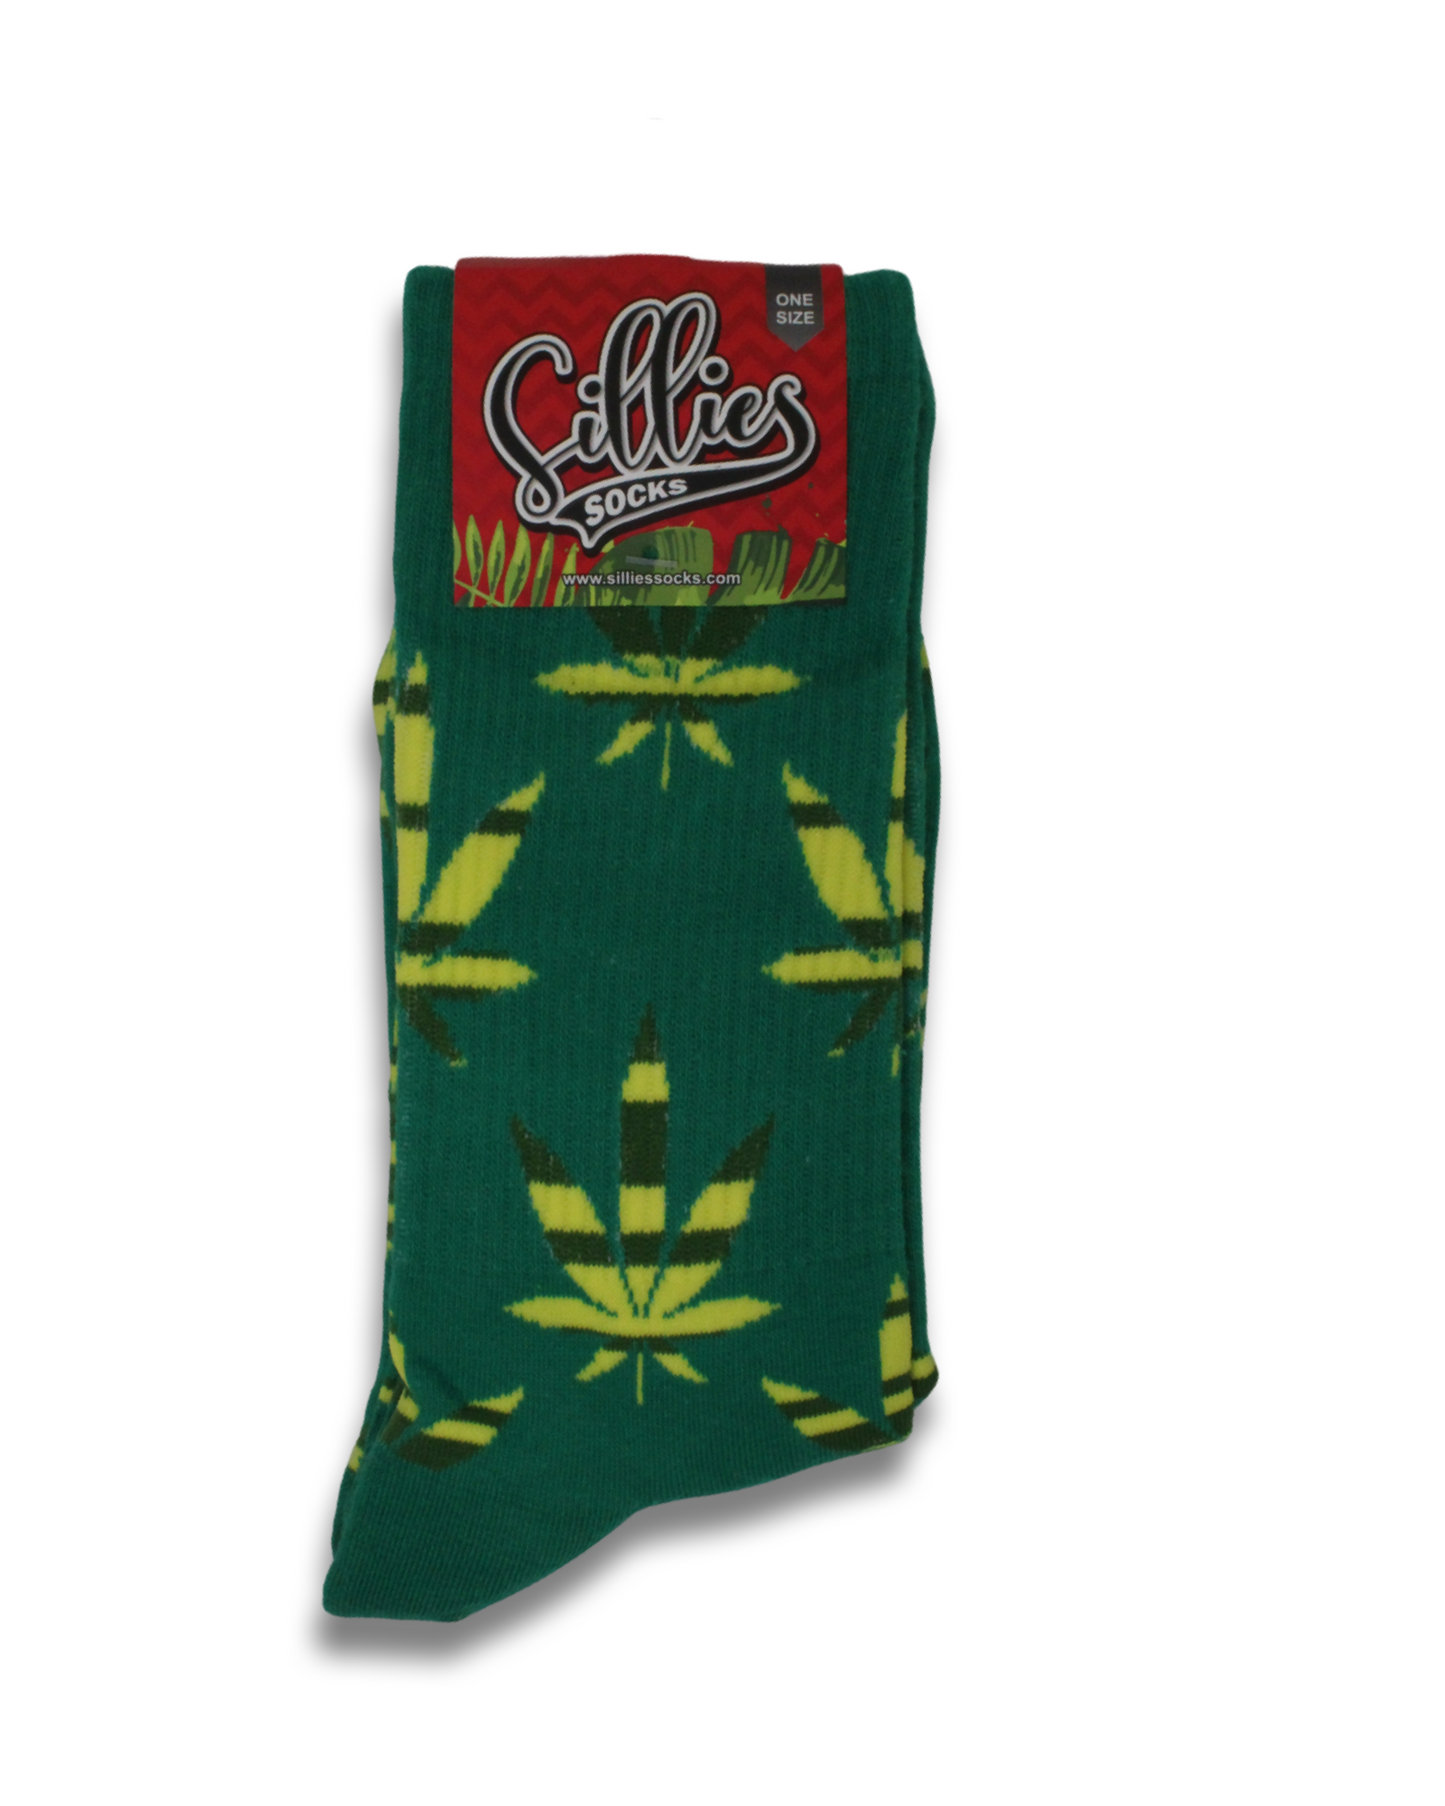 Sillies Socks One Size Green and Yellow Hemp Leaves with Stripes